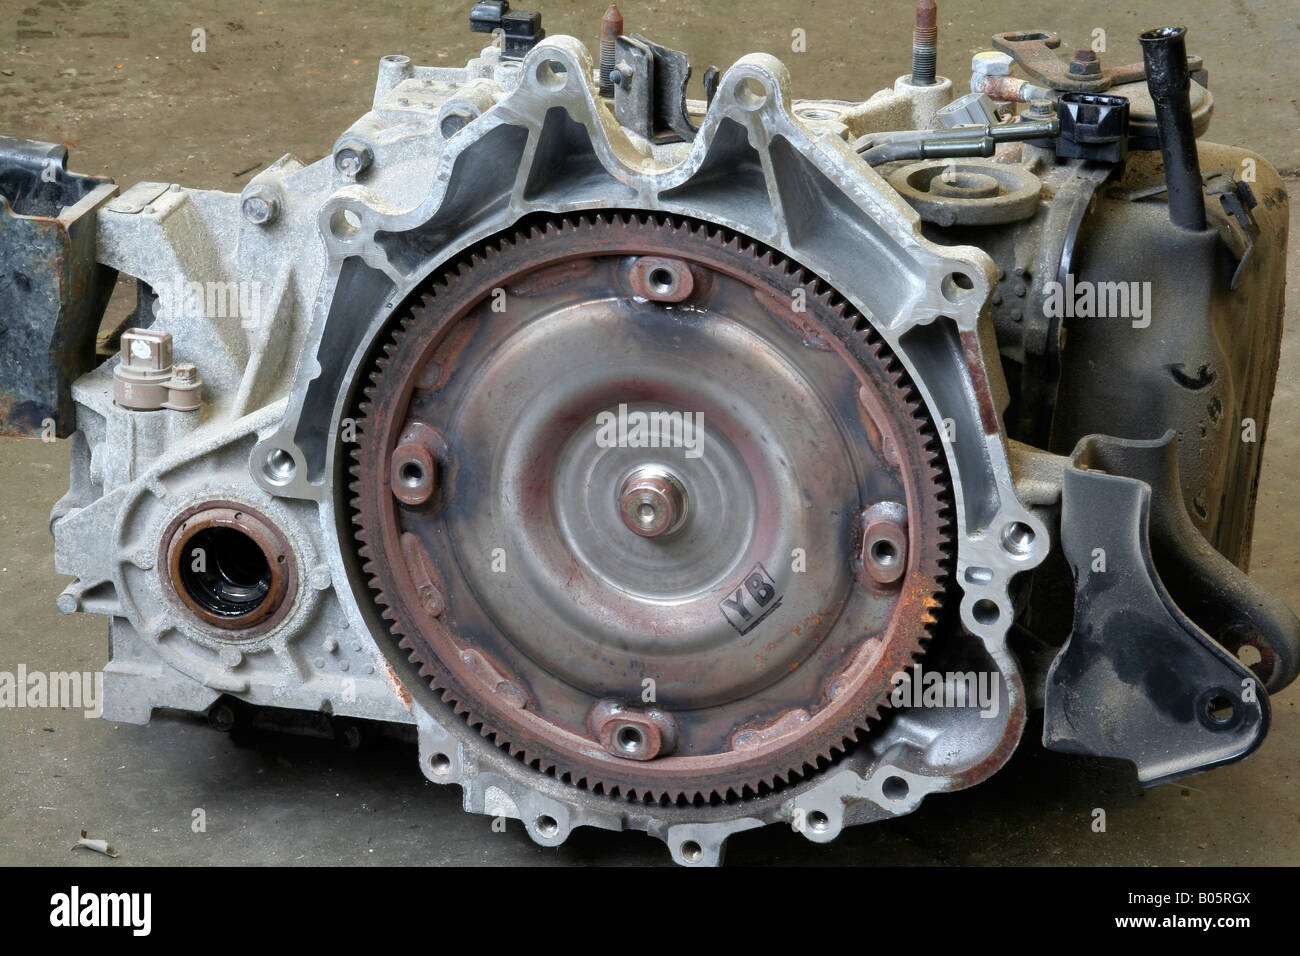 Automobile Transmission showing flywheel attachment and ring gear Stock Photo